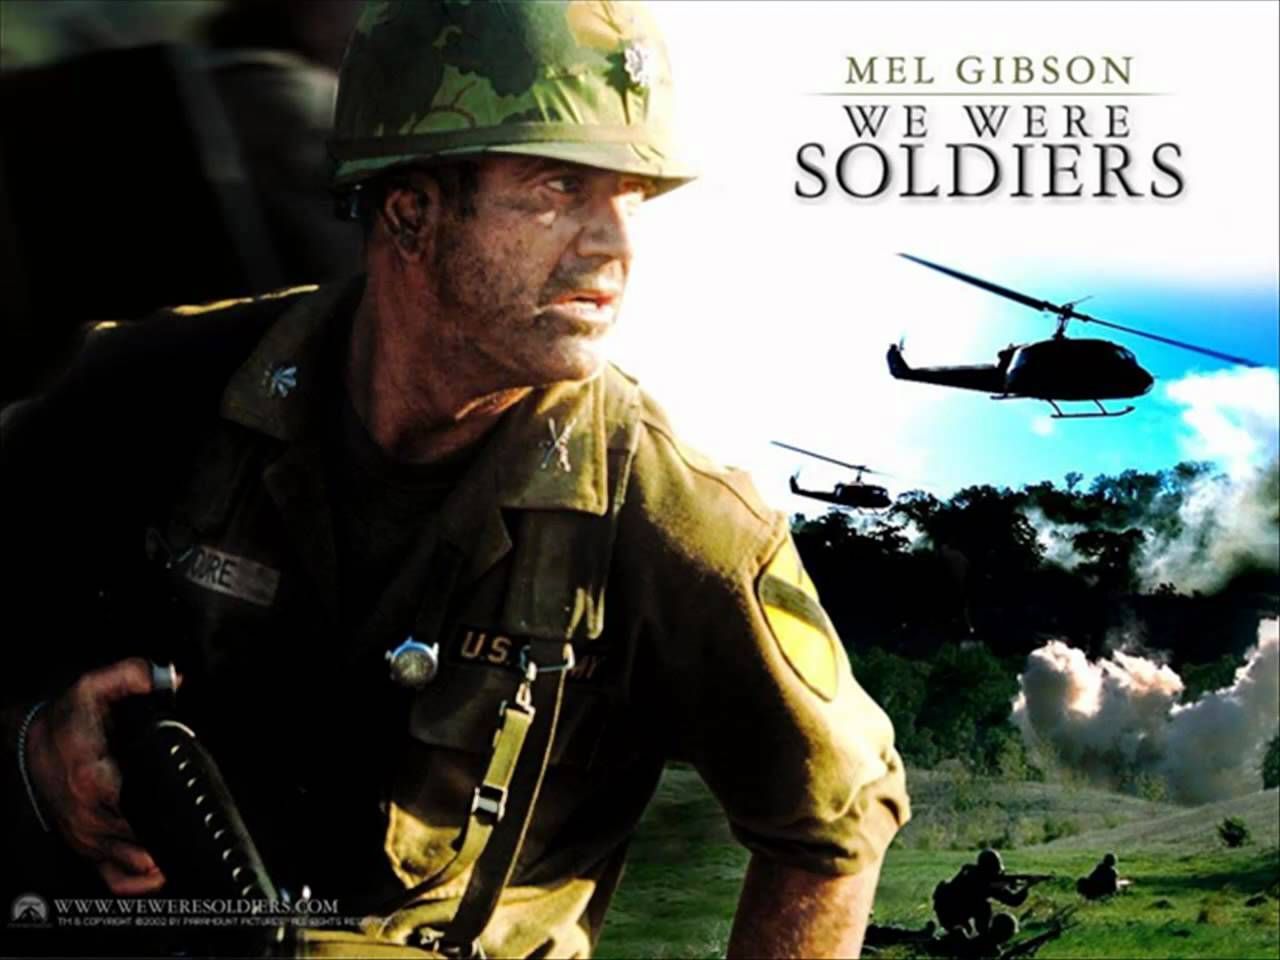 We Were Soldiers Soundtrack, No man behind [HD].mp4